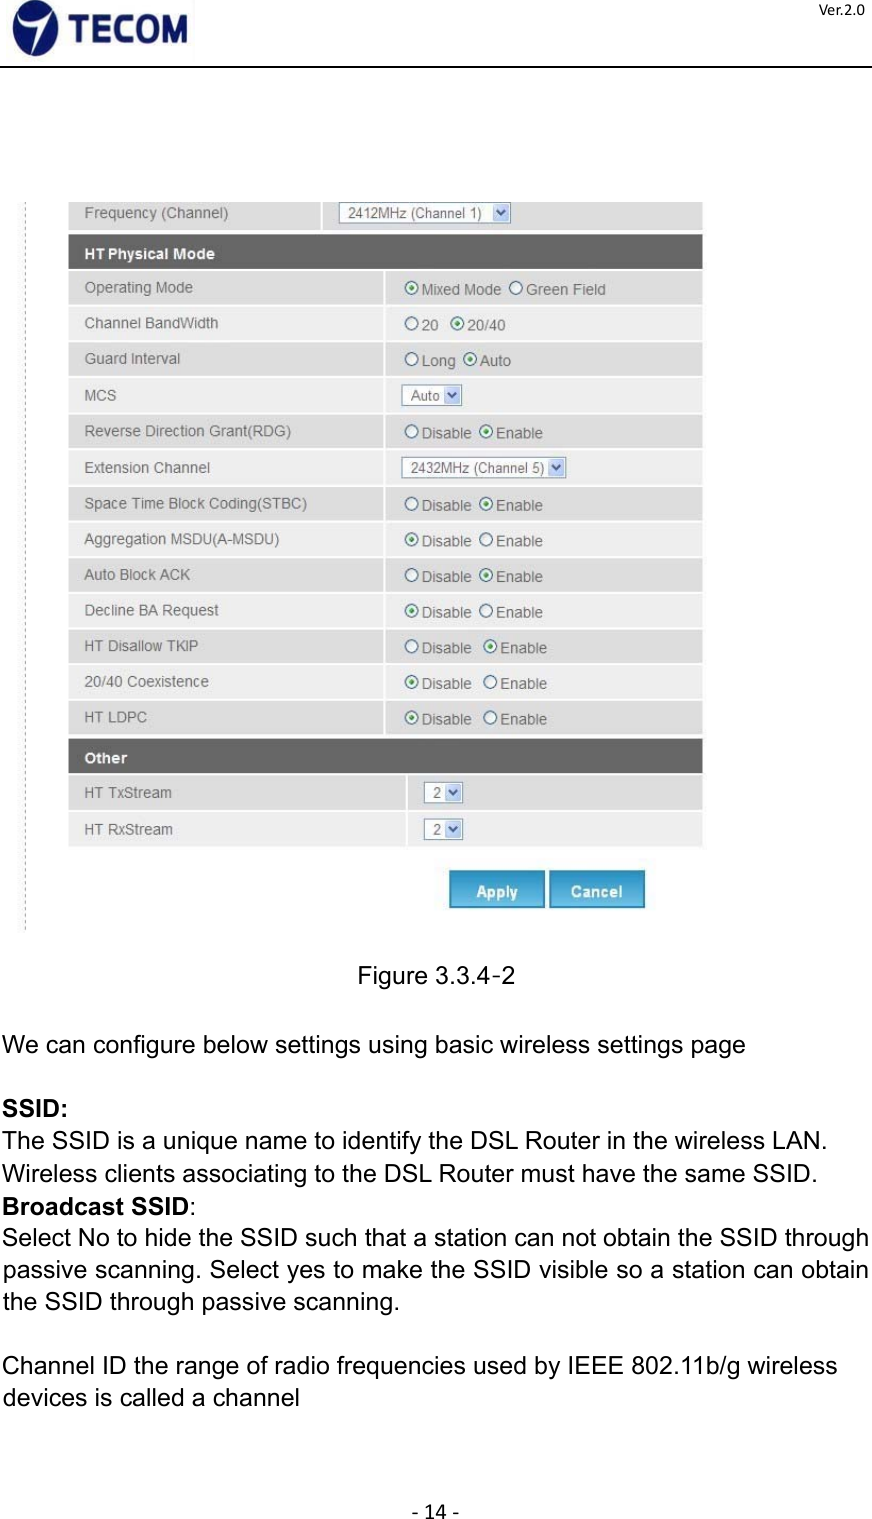  ‐14‐Ver.2.0      Figure 3.3.4‐2    We can configure below settings using basic wireless settings page    SSID:  The SSID is a unique name to identify the DSL Router in the wireless LAN.  Wireless clients associating to the DSL Router must have the same SSID.  Broadcast SSID:  Select No to hide the SSID such that a station can not obtain the SSID through passive scanning. Select yes to make the SSID visible so a station can obtain the SSID through passive scanning.    Channel ID the range of radio frequencies used by IEEE 802.11b/g wireless devices is called a channel     